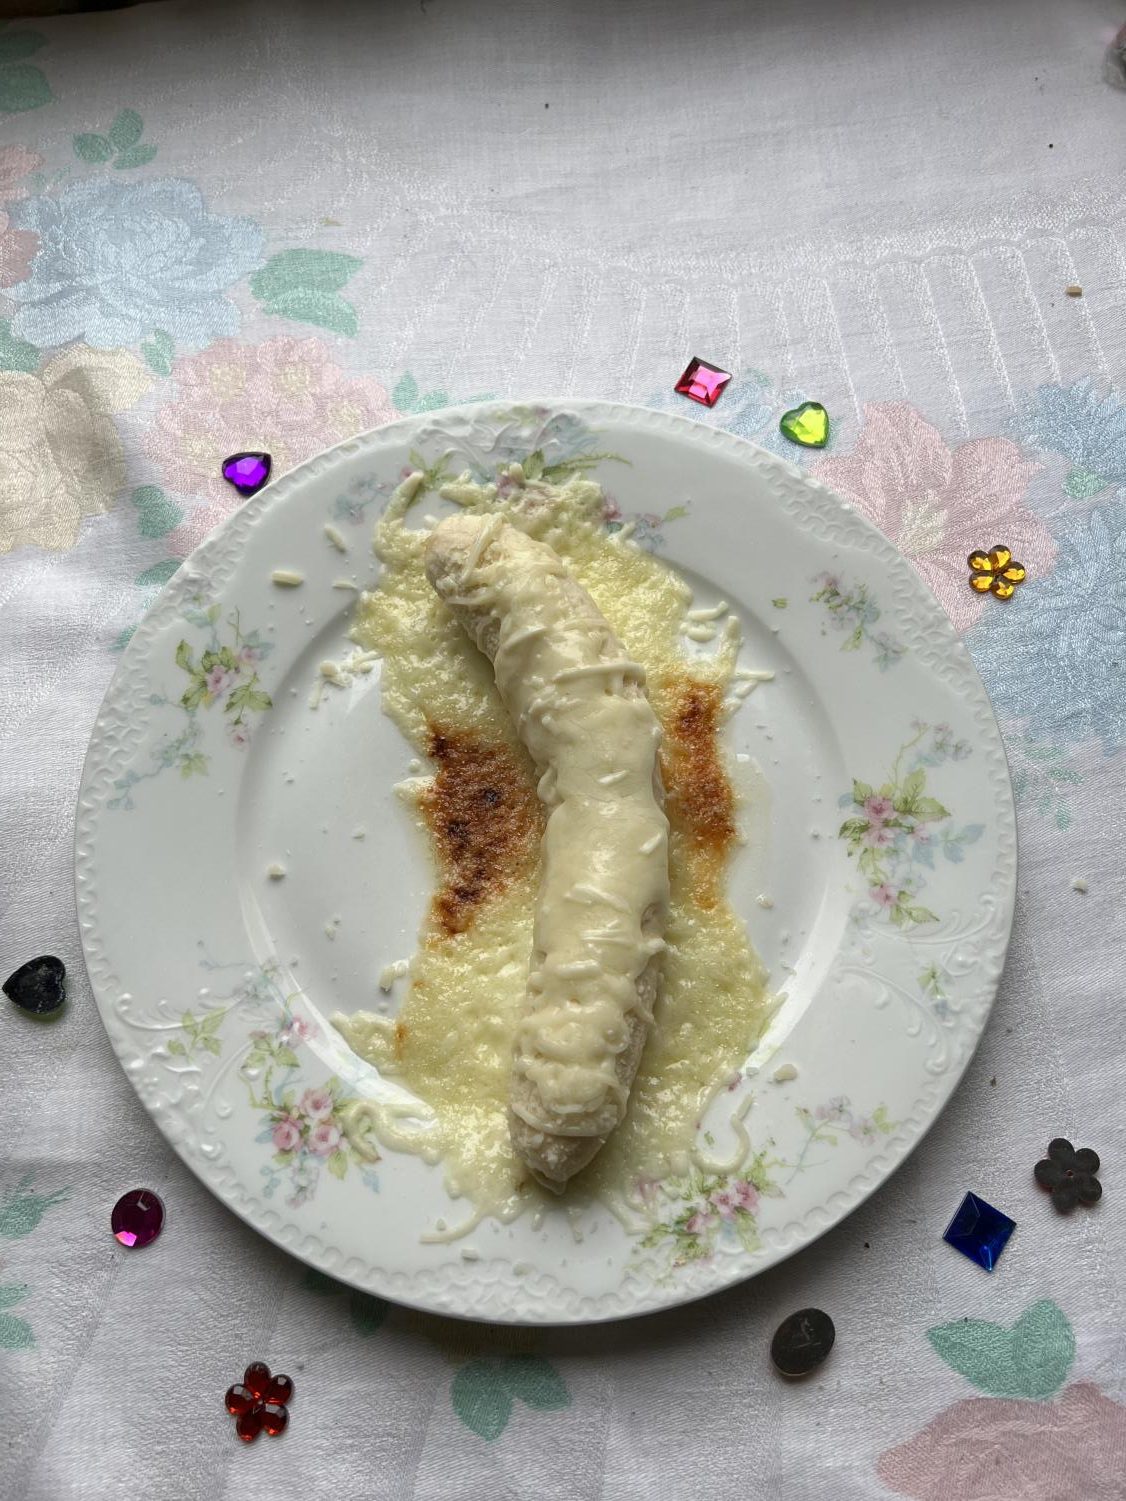 banana with melted cheese on top. white plate and white flowery table cloth